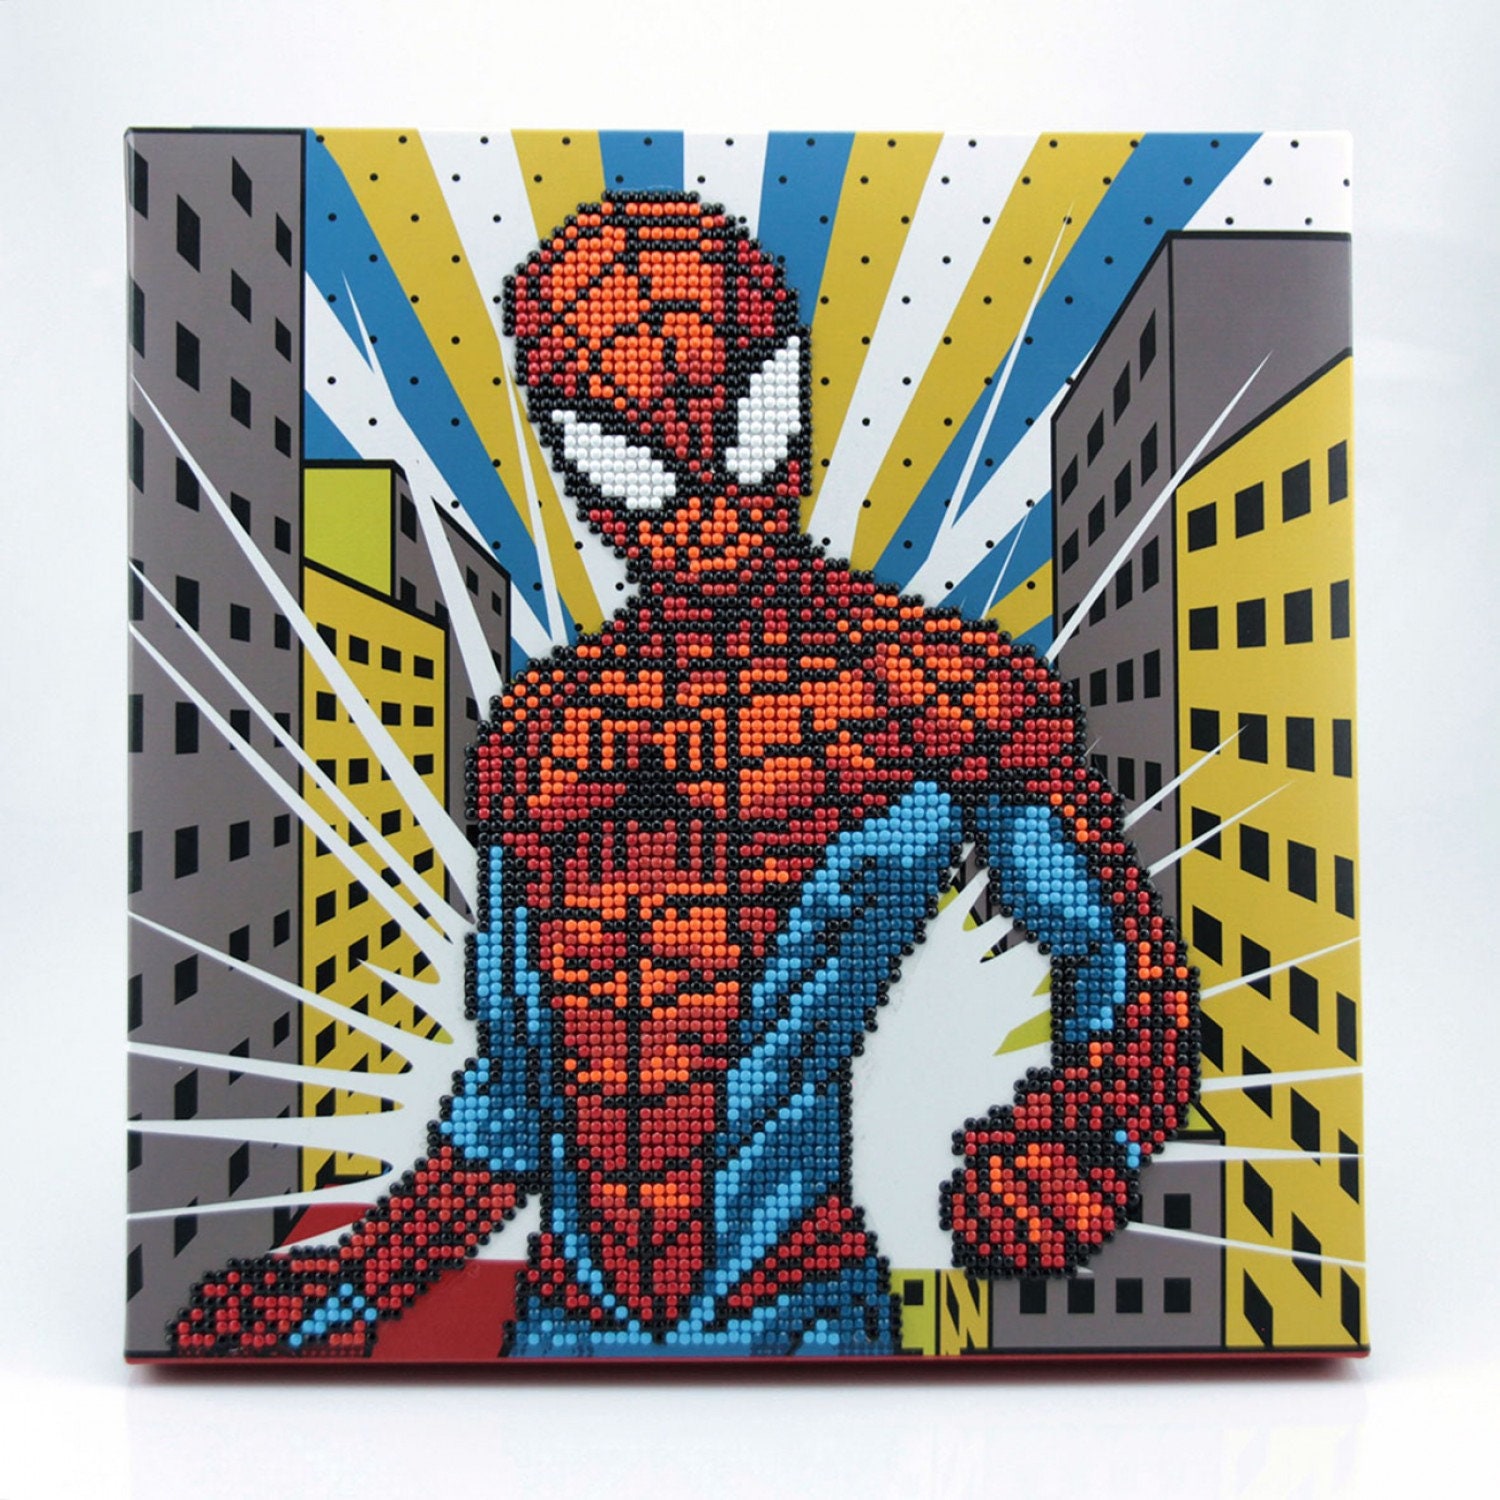 DIY 5D Spiderman Diamond Painting by Number Kits for Adults and Kids,12 x 16 inch Round Full Drill Crystal Rhinestone Embroidery Cross Stitch Arts